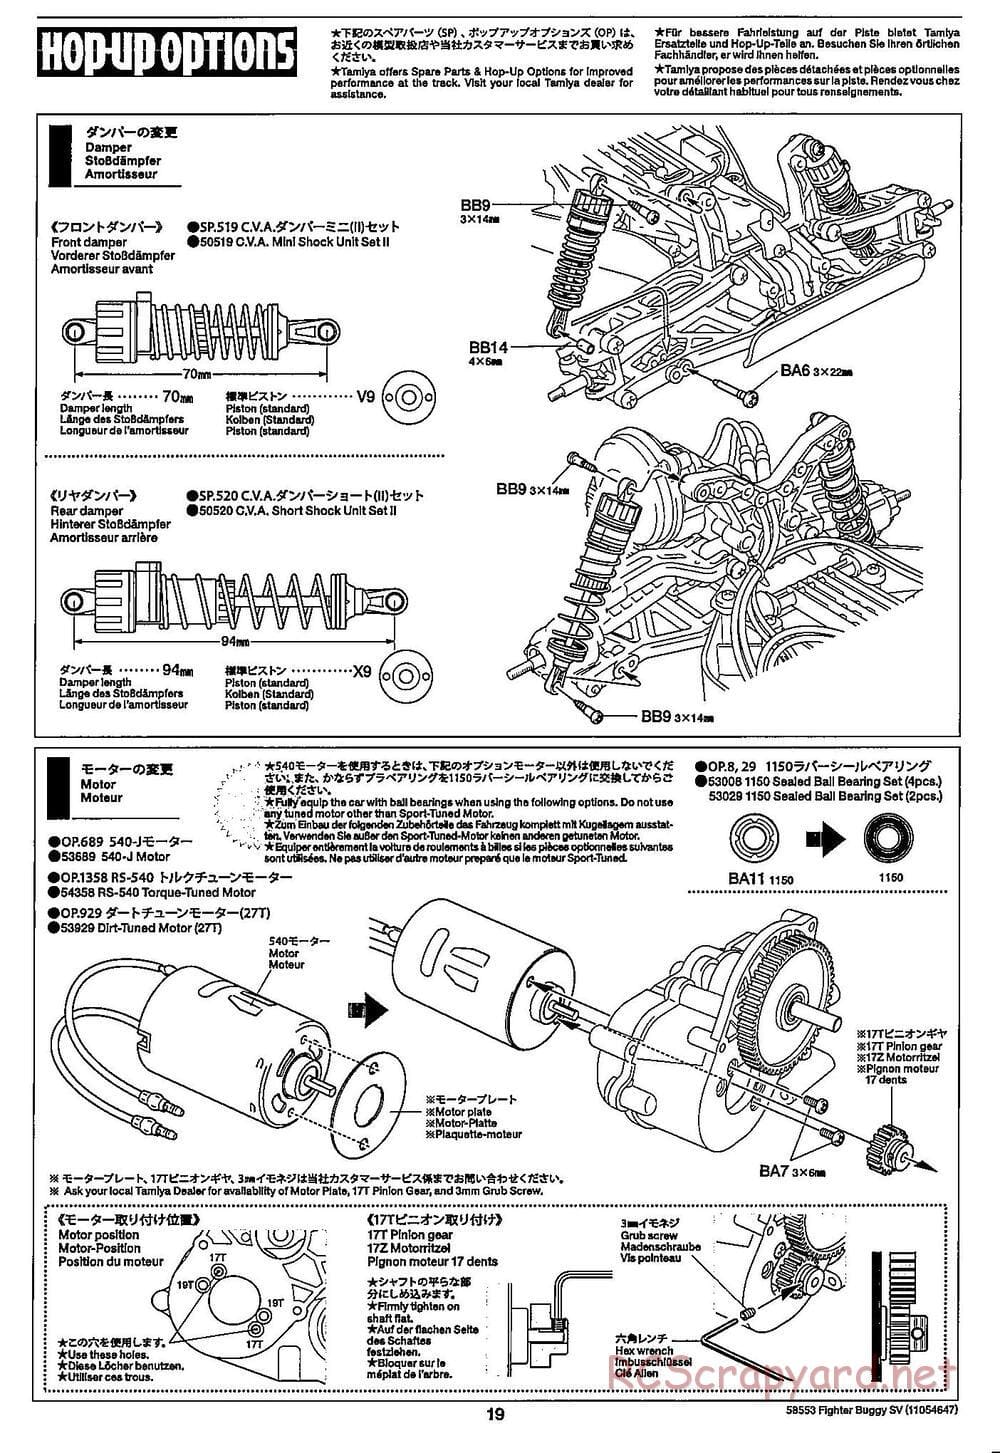 Tamiya - Fighter Buggy SV Chassis - Manual - Page 19